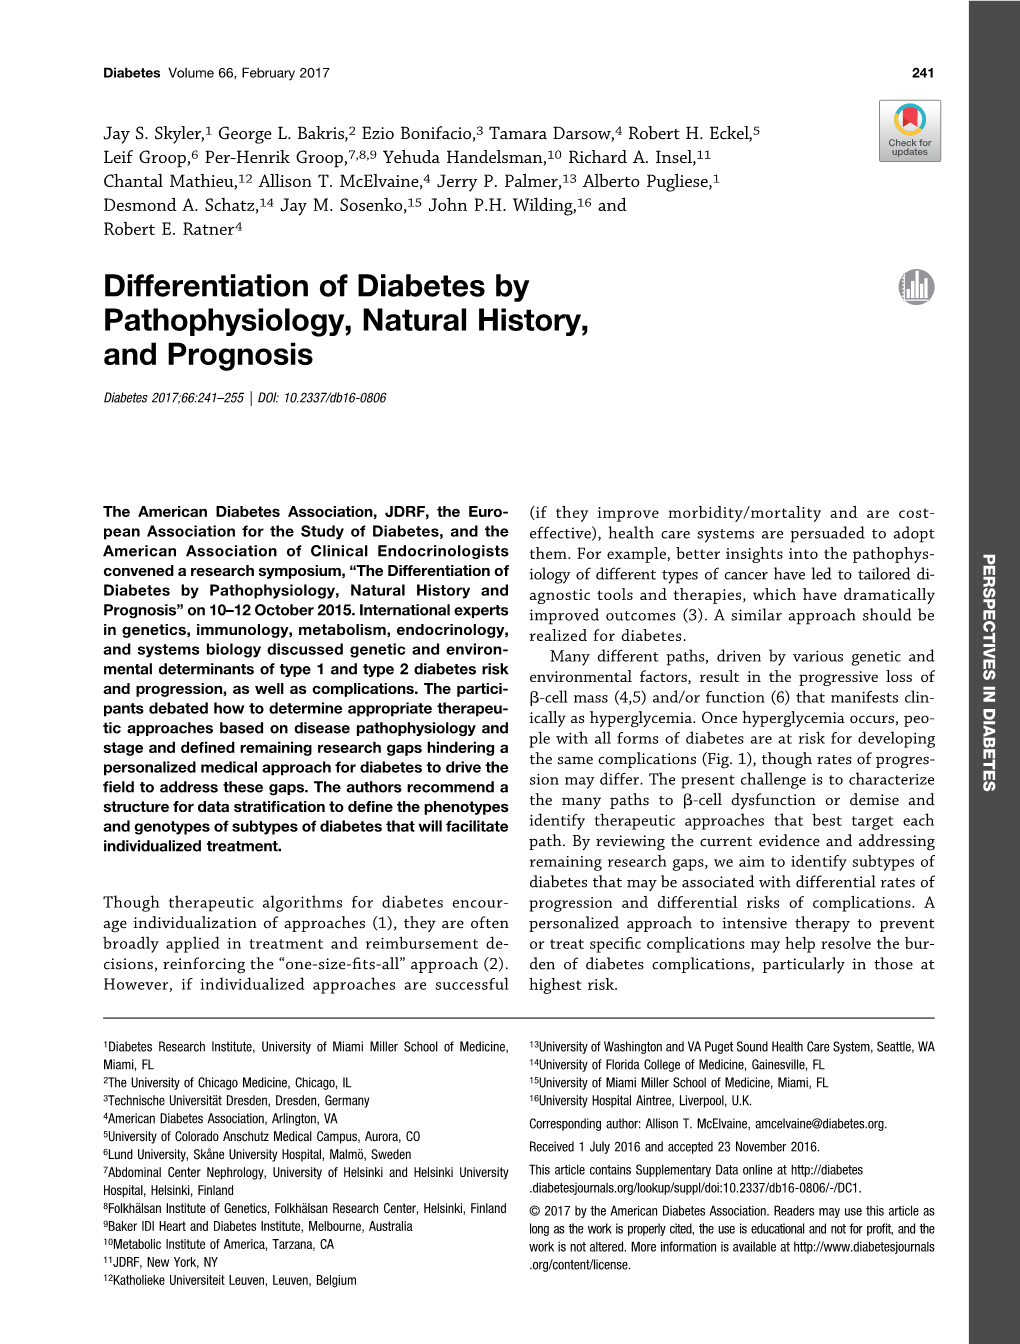 Differentiation of Diabetes by Pathophysiology, Natural History, and Prognosis